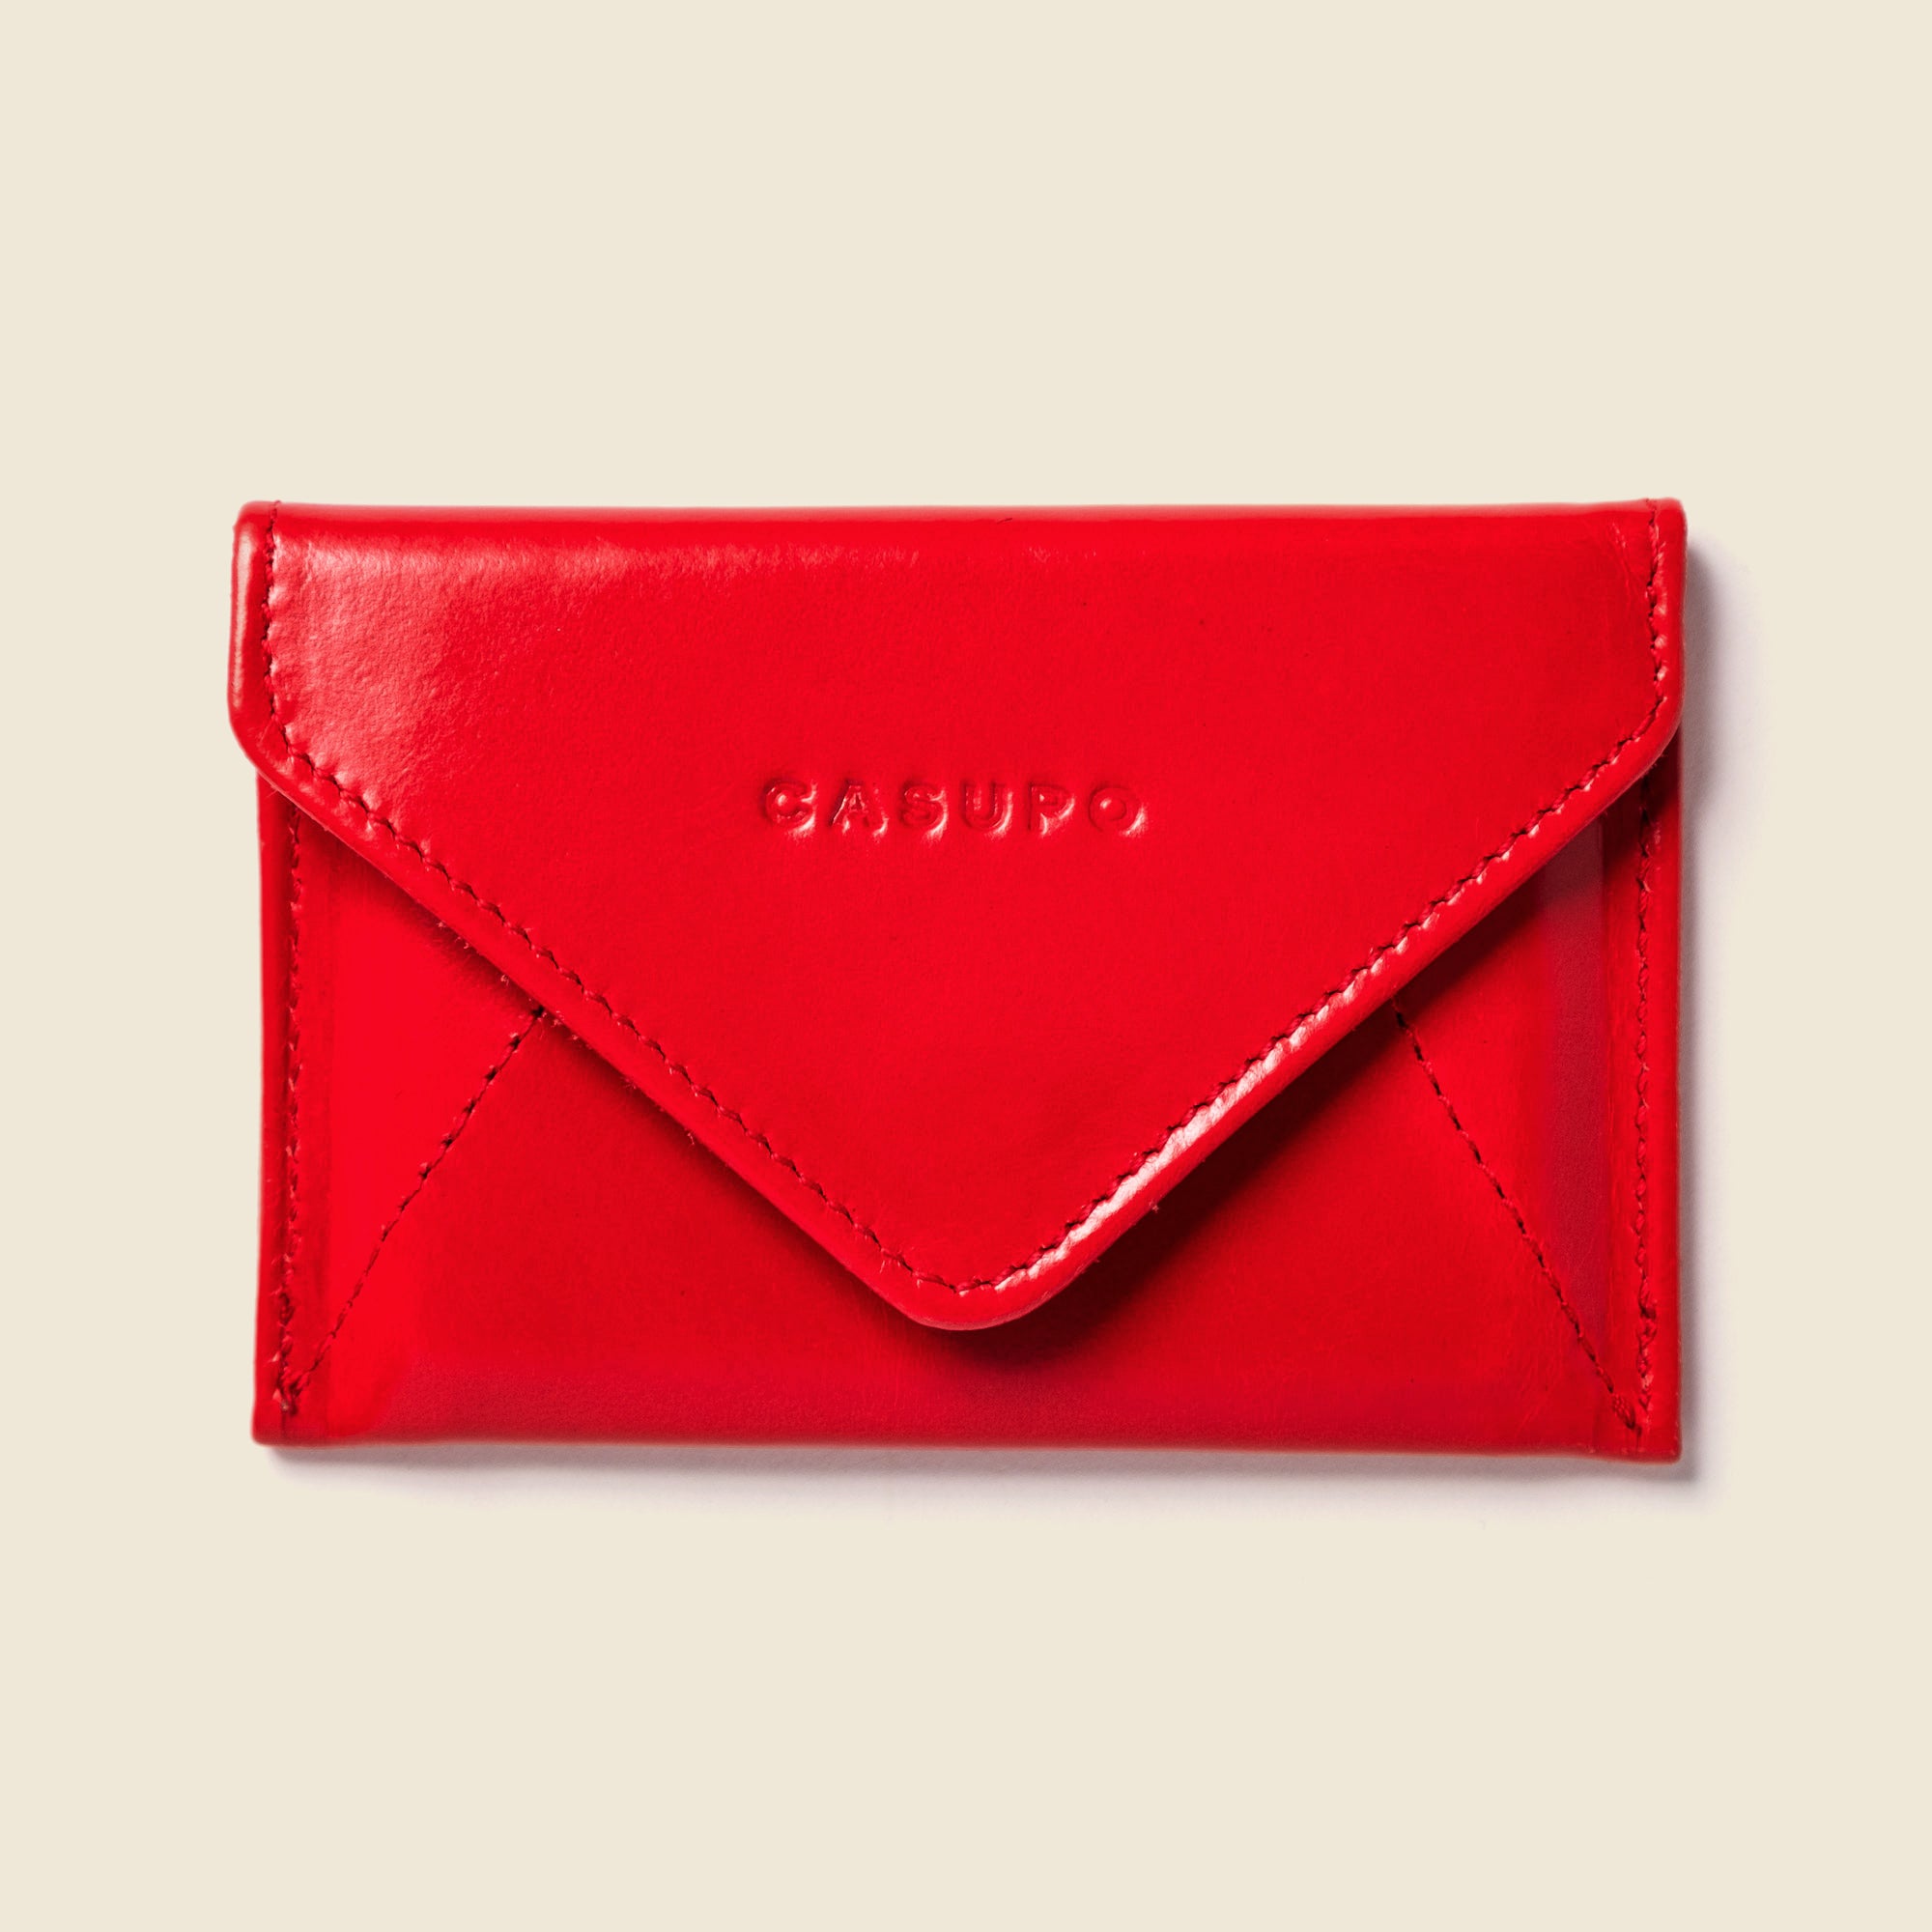 Red leather wallet for abundance